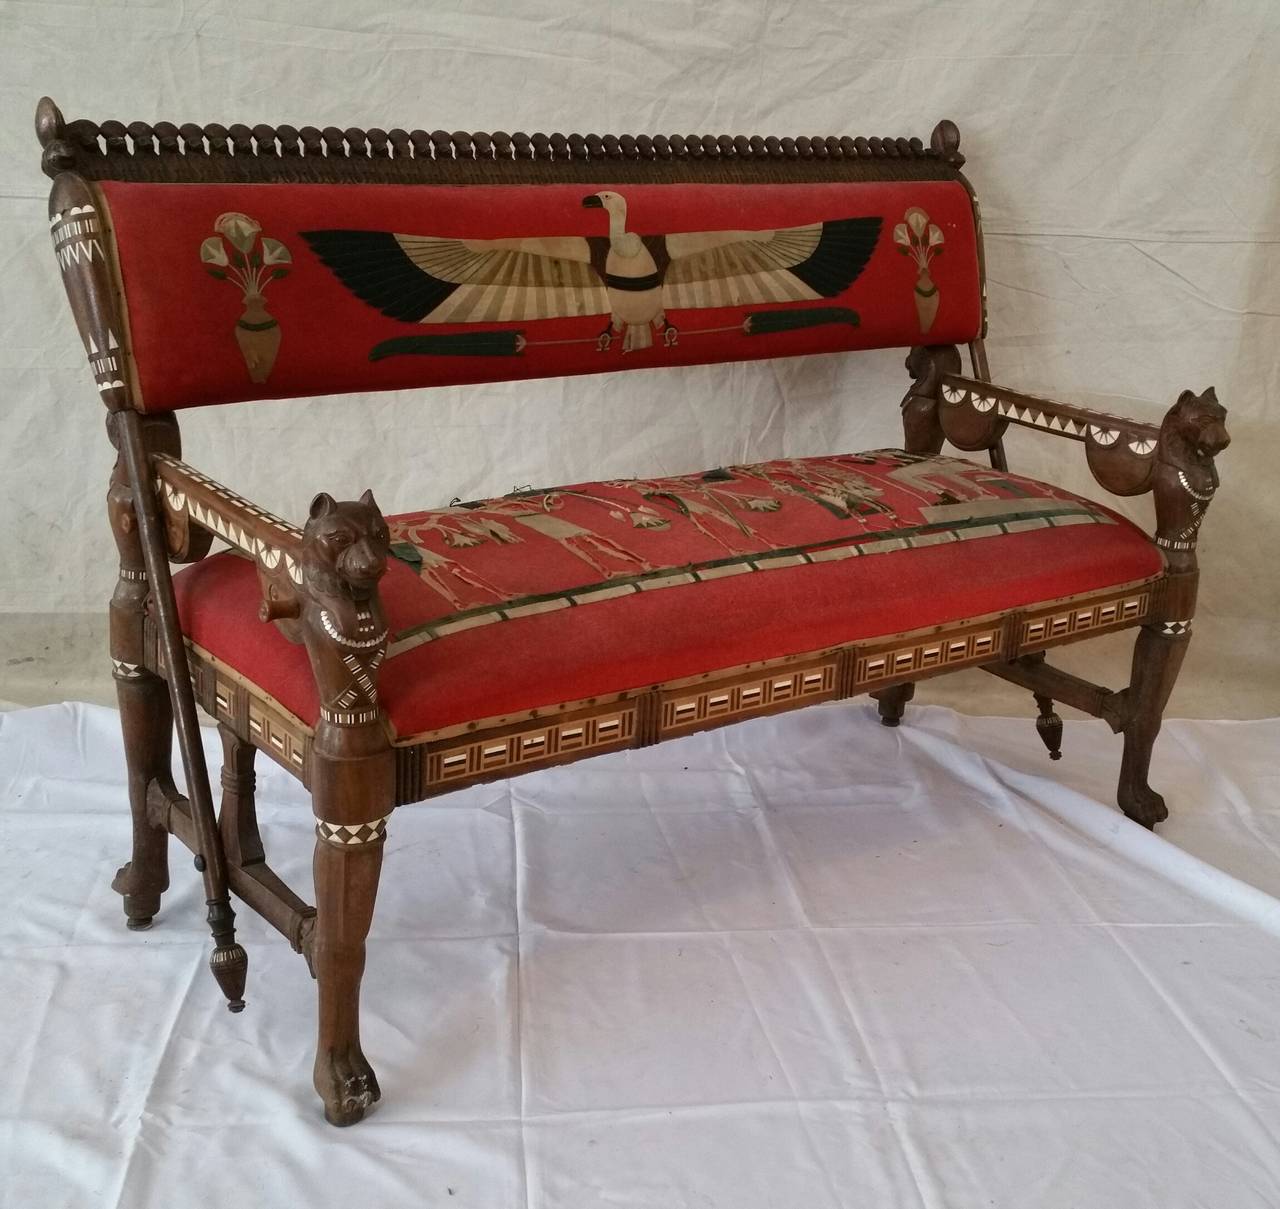 Egyptian Revival loveseat composed of rosewood inlaid with bone,ebony ,,Upholstered in a very rare felt hand stitched applique fabric in Egyptian motif,,original,The loveseat features reversable back and decorative Egyptian carvings,,Similar example